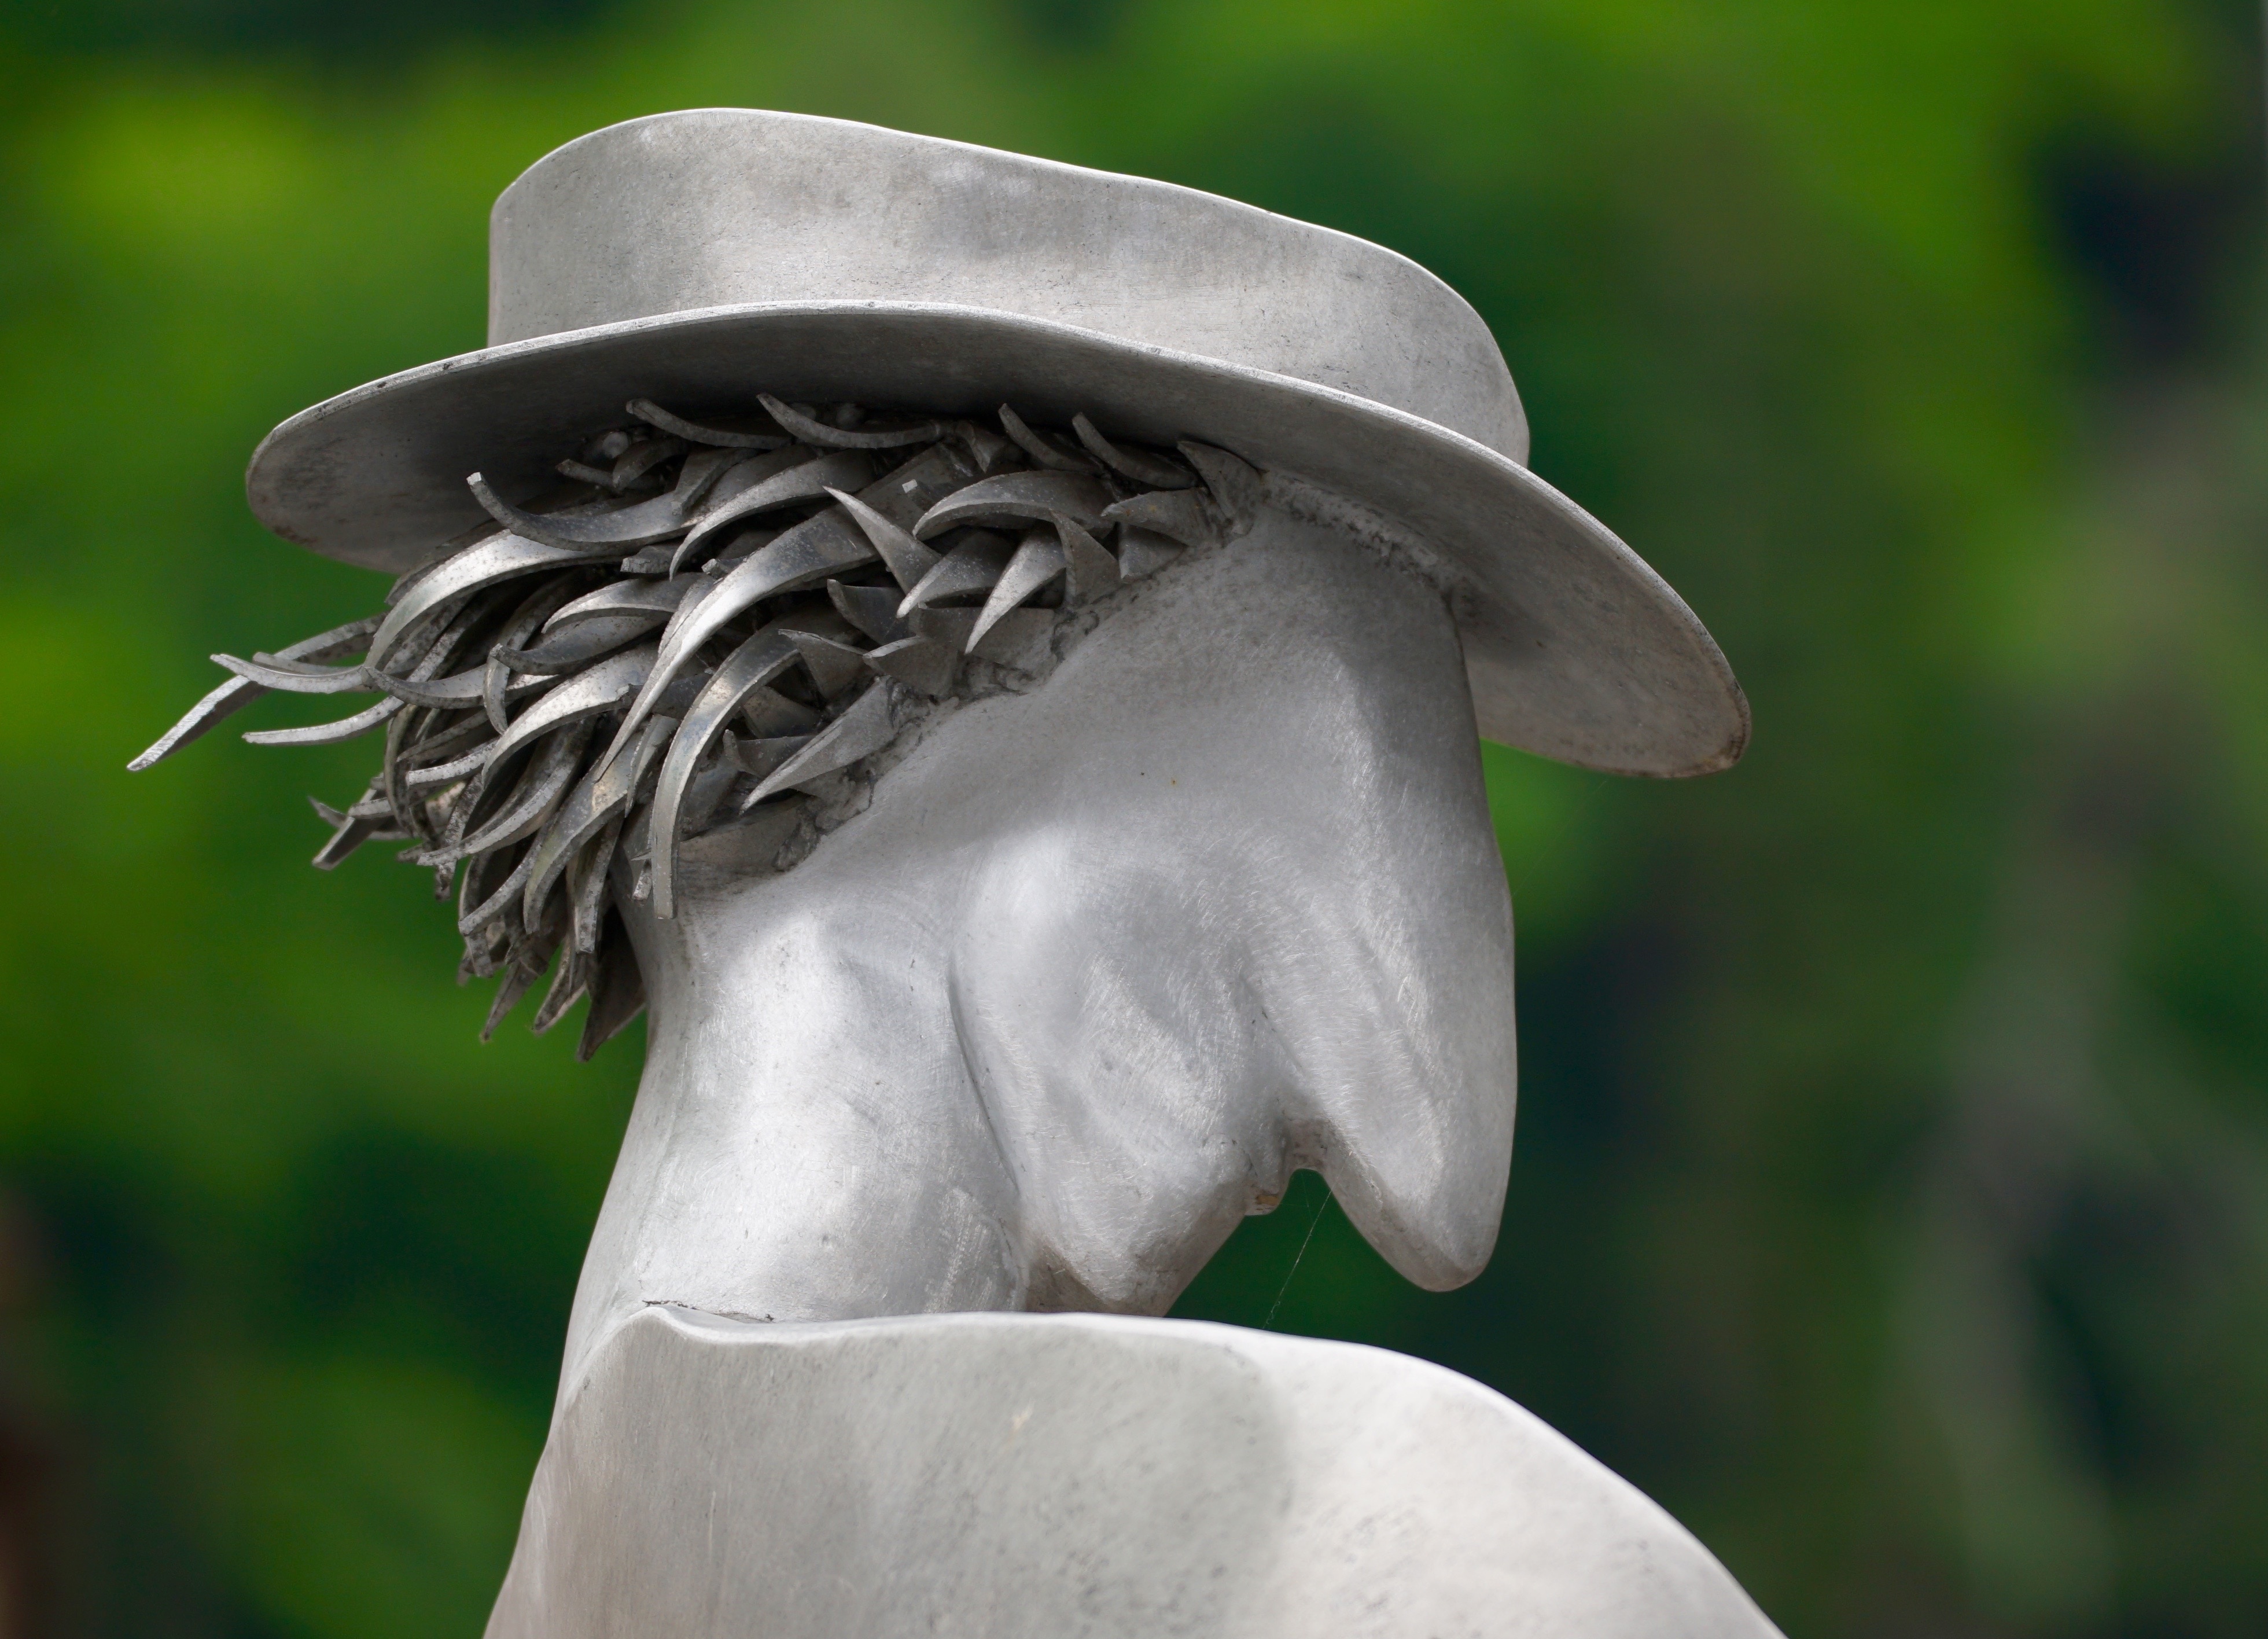 white human face shape with hat sculpture